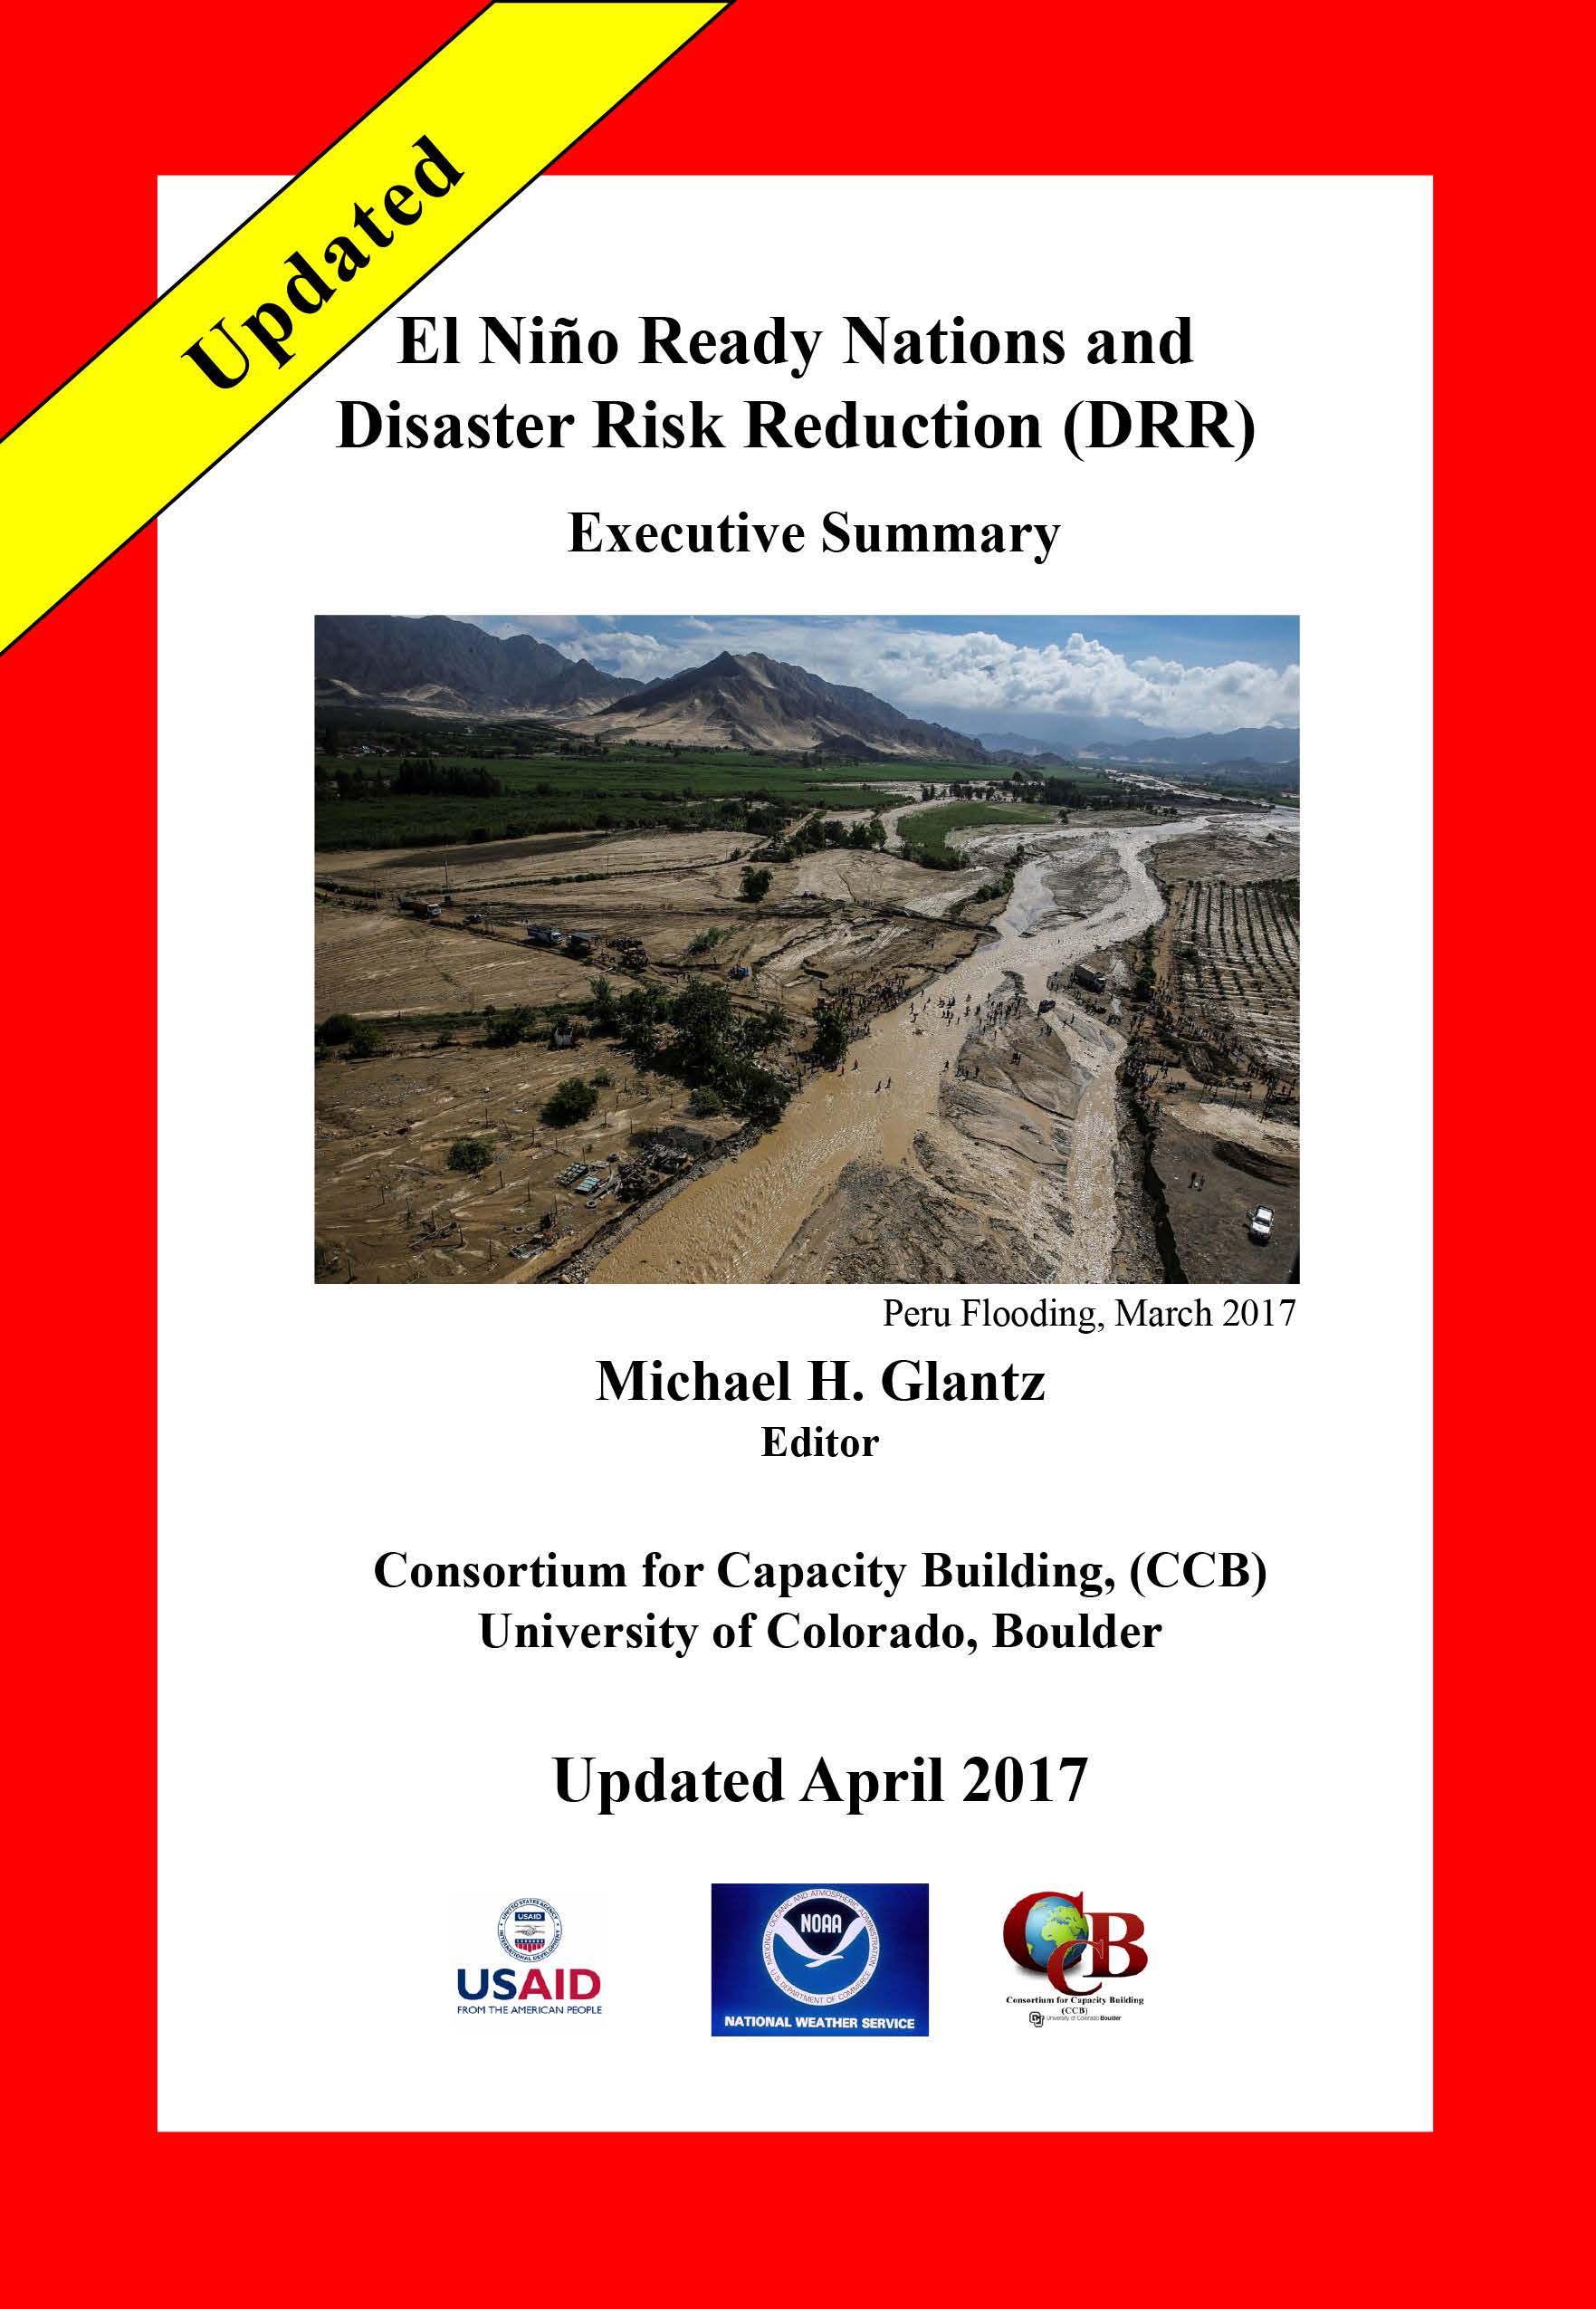 El Niño Ready Nations and Disaster Risk Deduction (DRR) Report